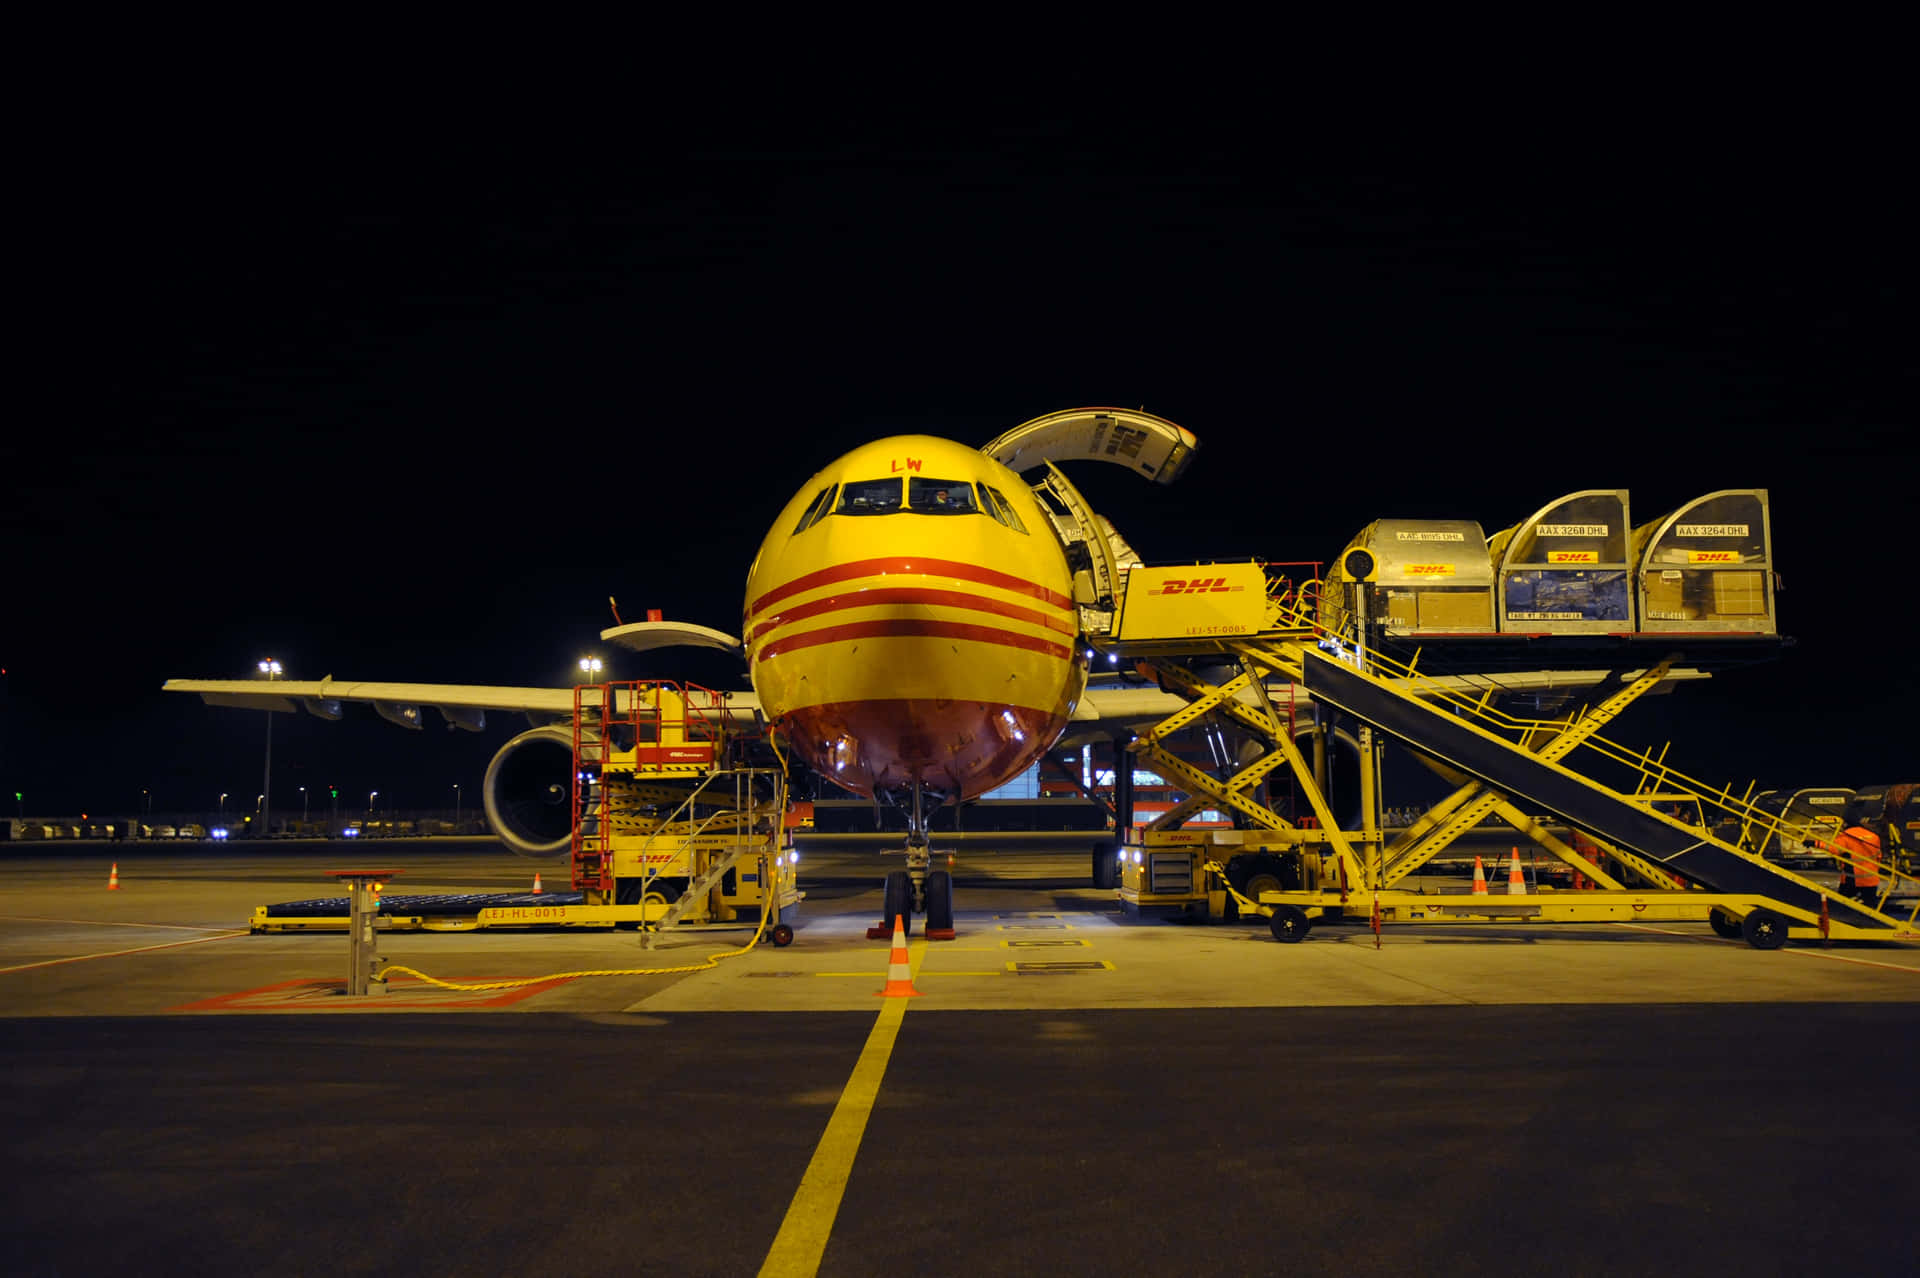 DHL delivers timely, reliable service